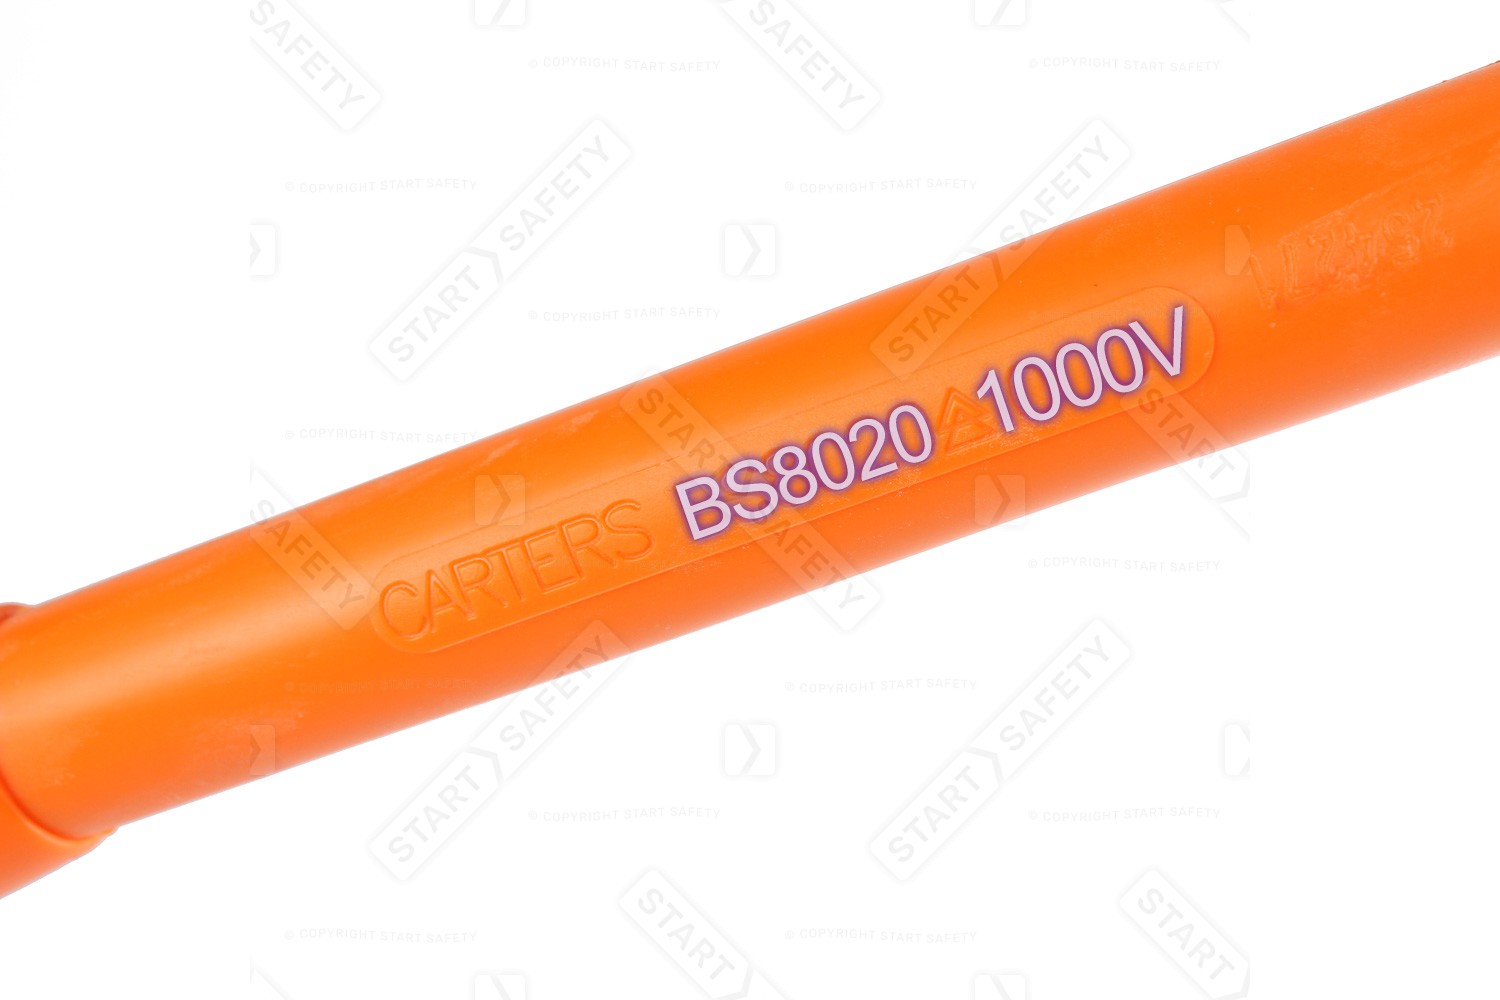 BS8020 compliant insulated tool